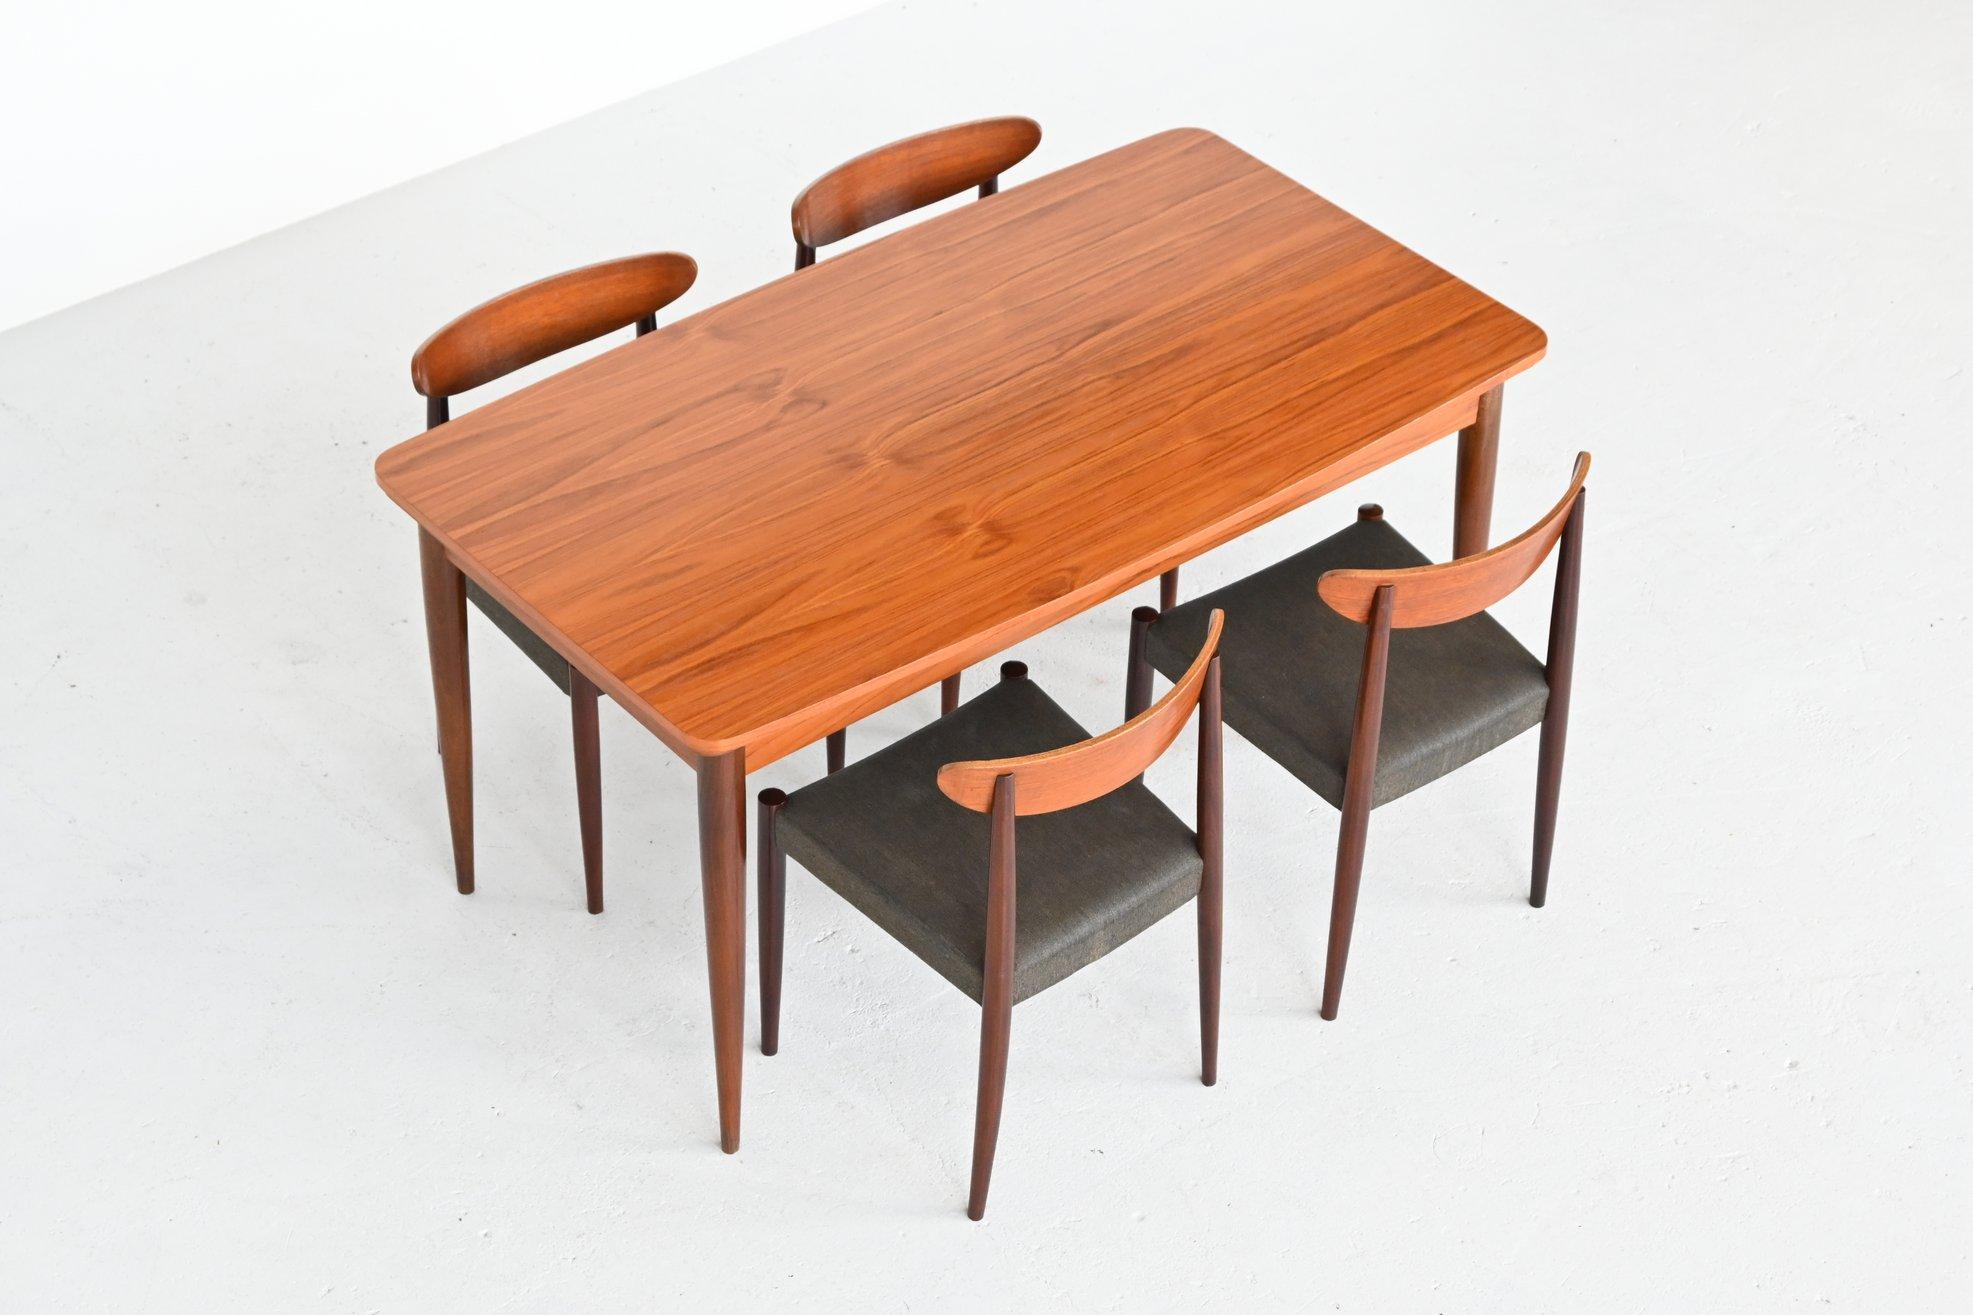 Very nice dining table designed by Oswald Vermaercke and manufactured by V Form, Belgium 1960. This table has solid teak wooden legs and a veneered top. It has a beautiful warm grain to the wood. The table can be easily extended from 150 cm to 270